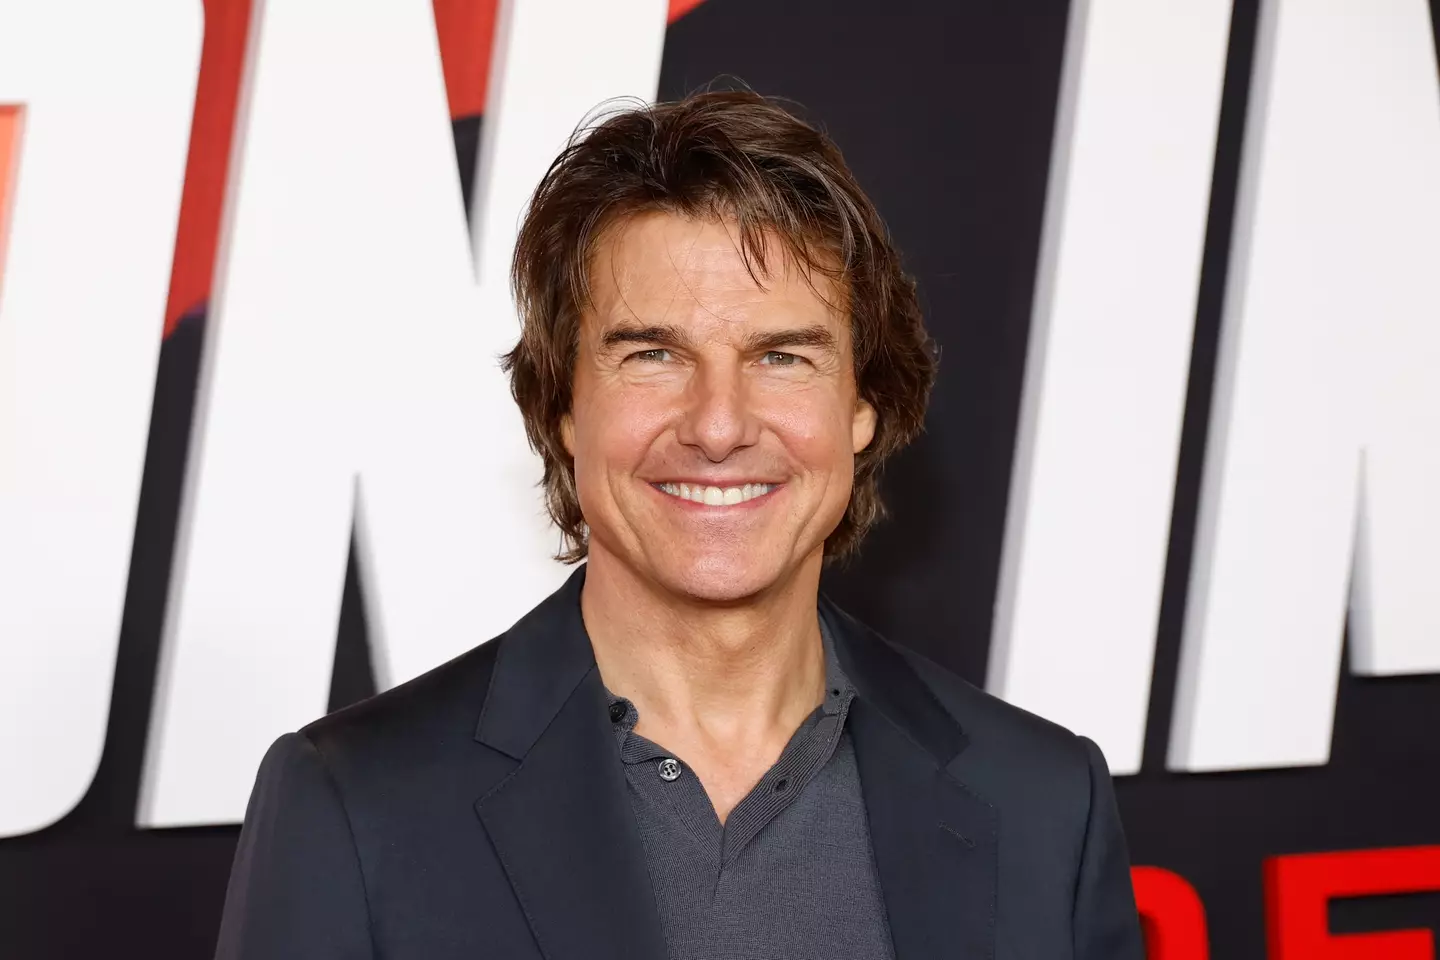 Tom Cruise is thought to have become a Scientologist in the 80s.